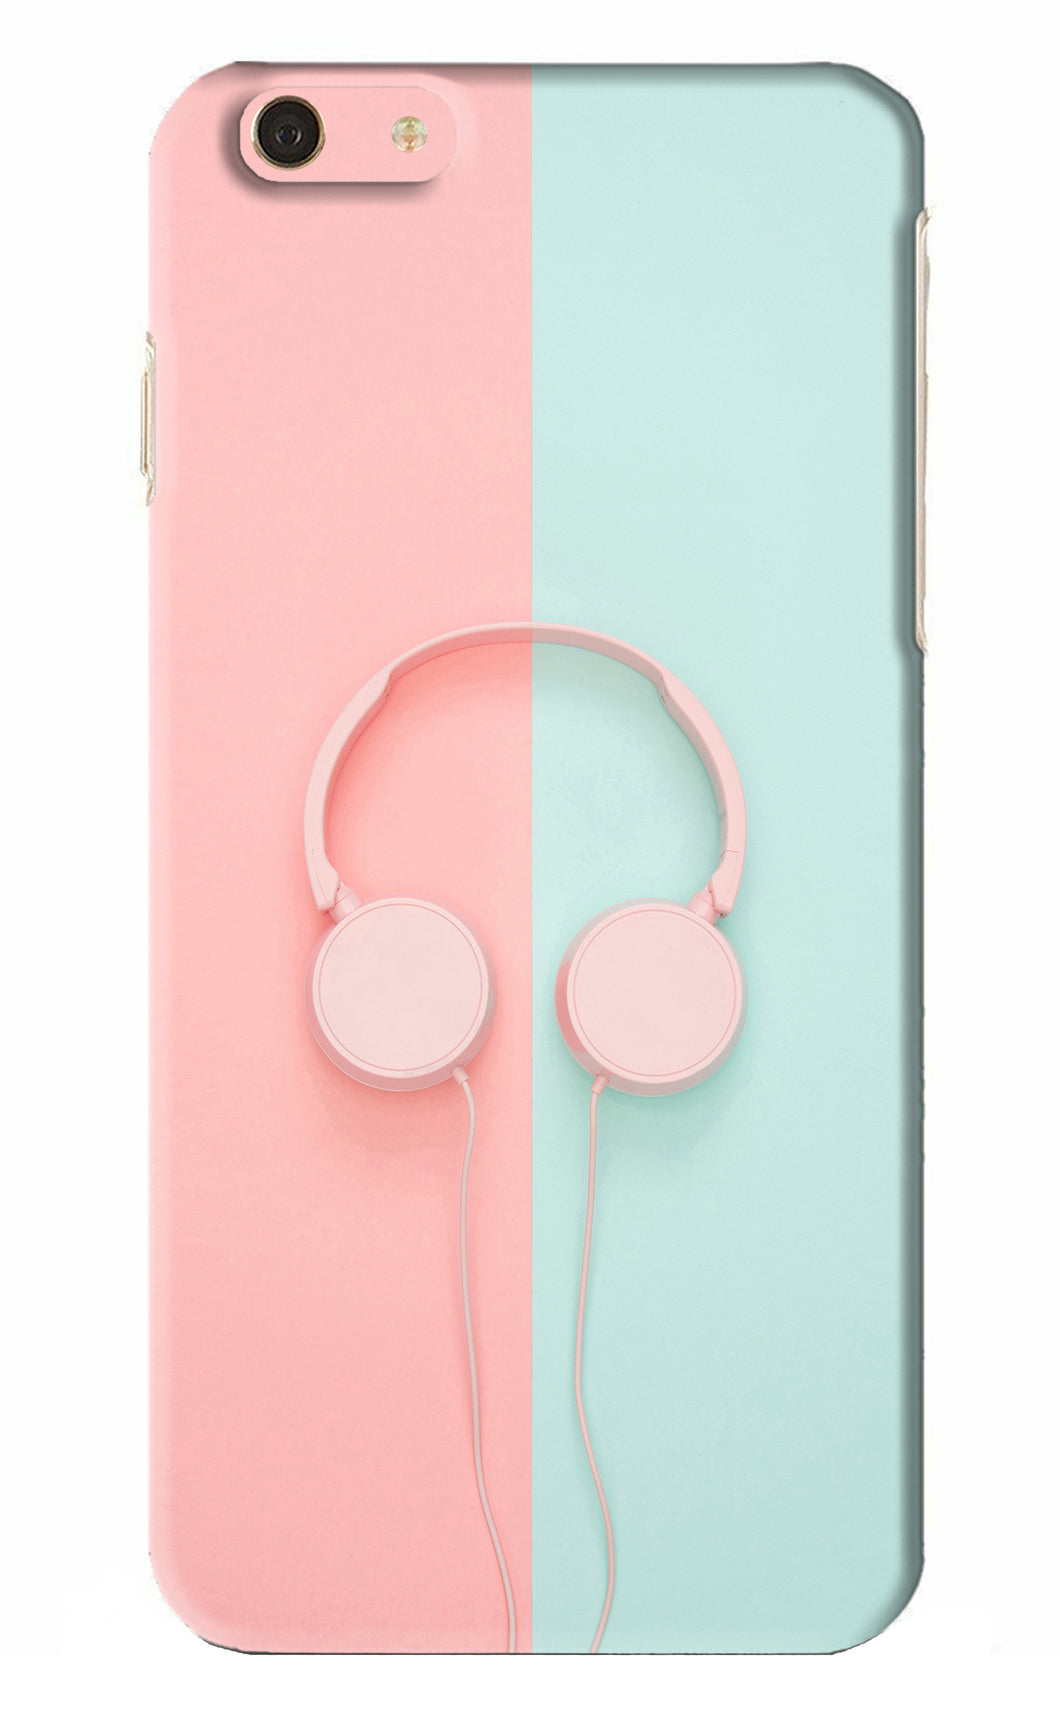 Music Lover iPhone 6S Plus Back Skin Wrap